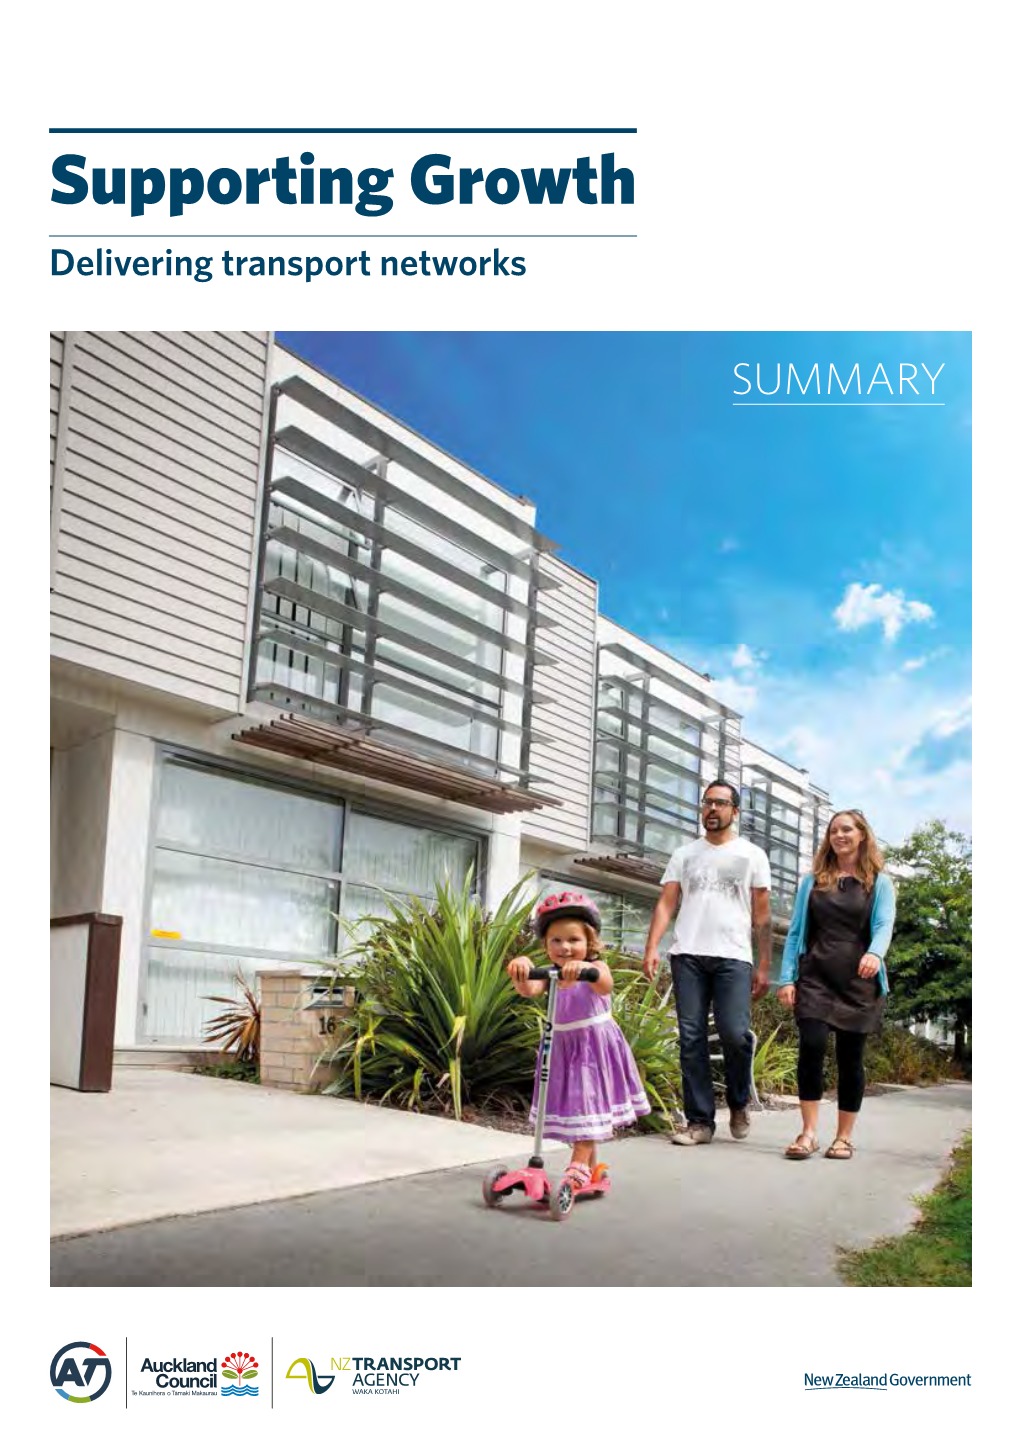 Supporting Growth Delivering Transport Networks